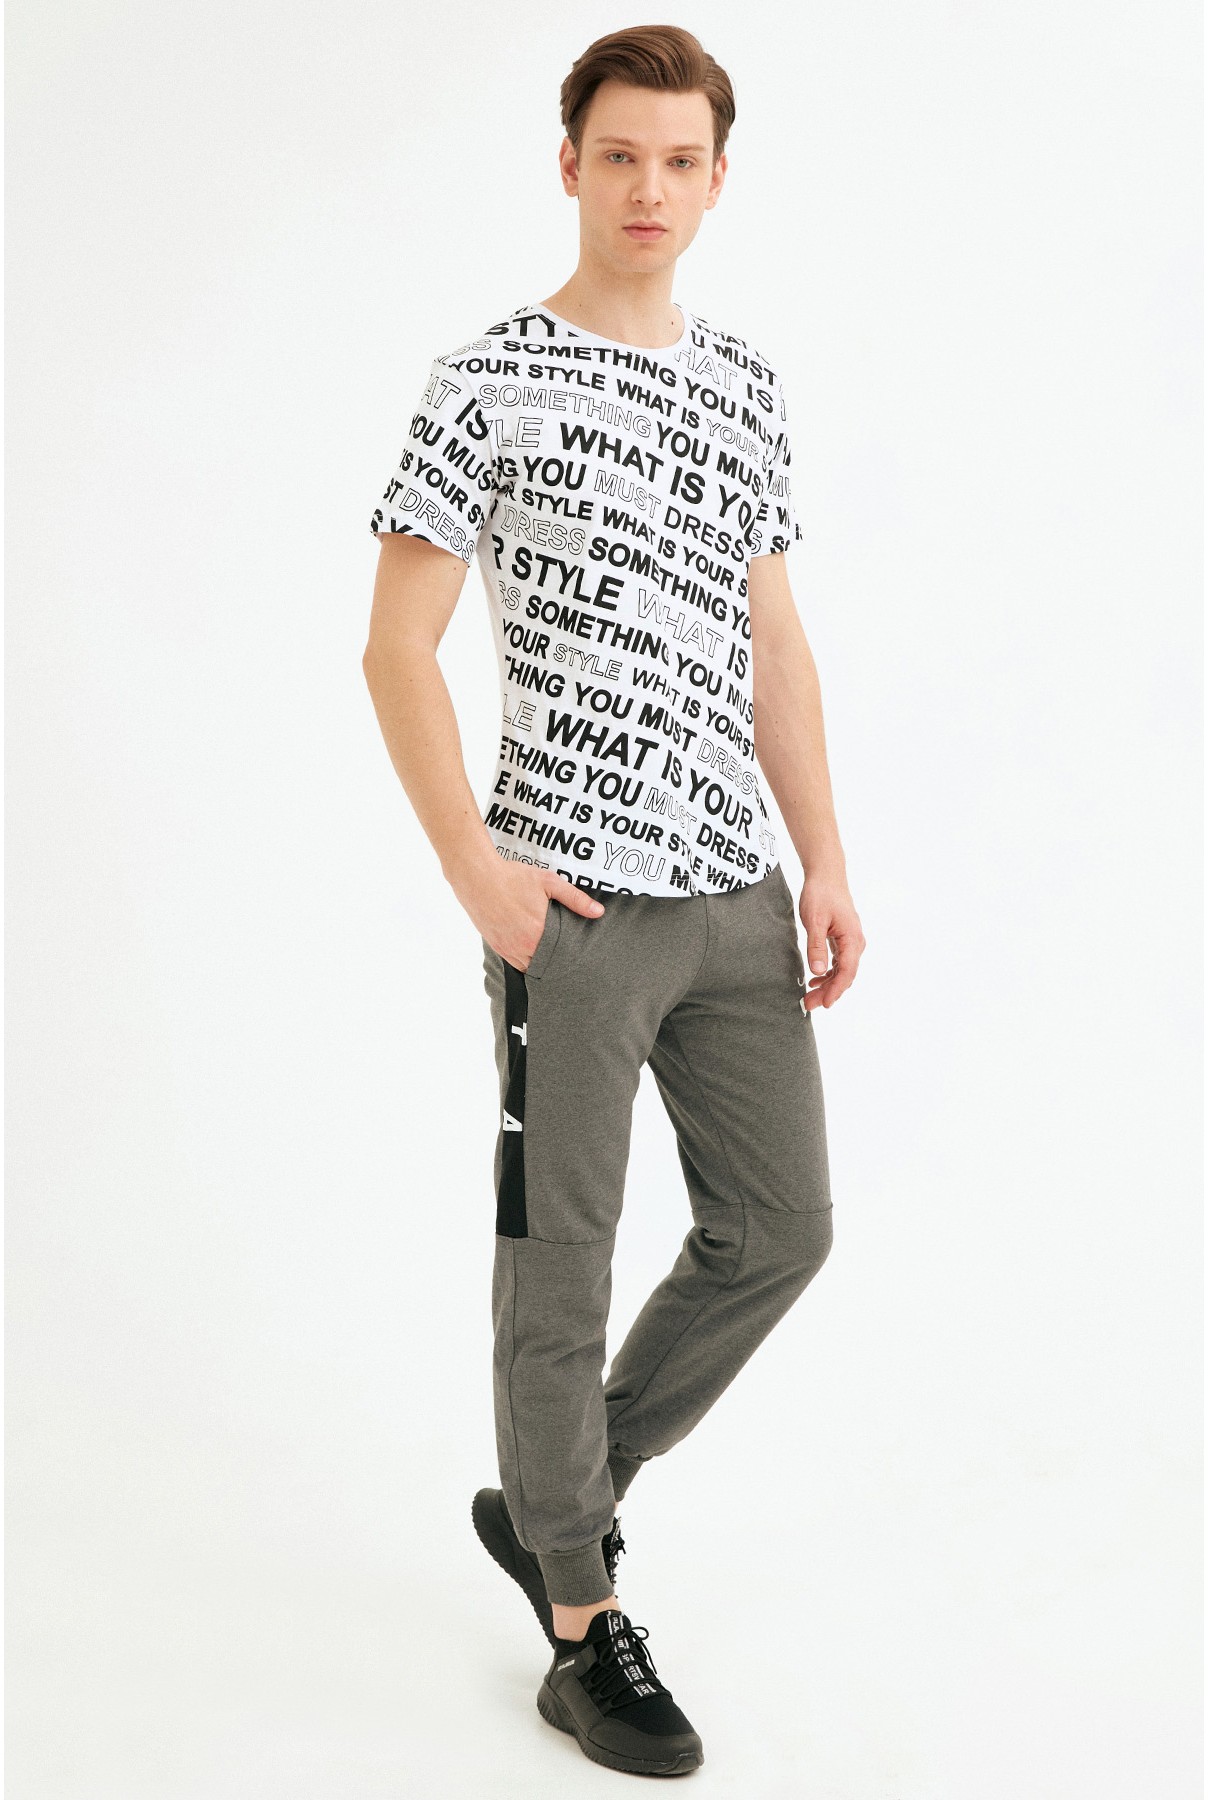 Men's trousers with side letters